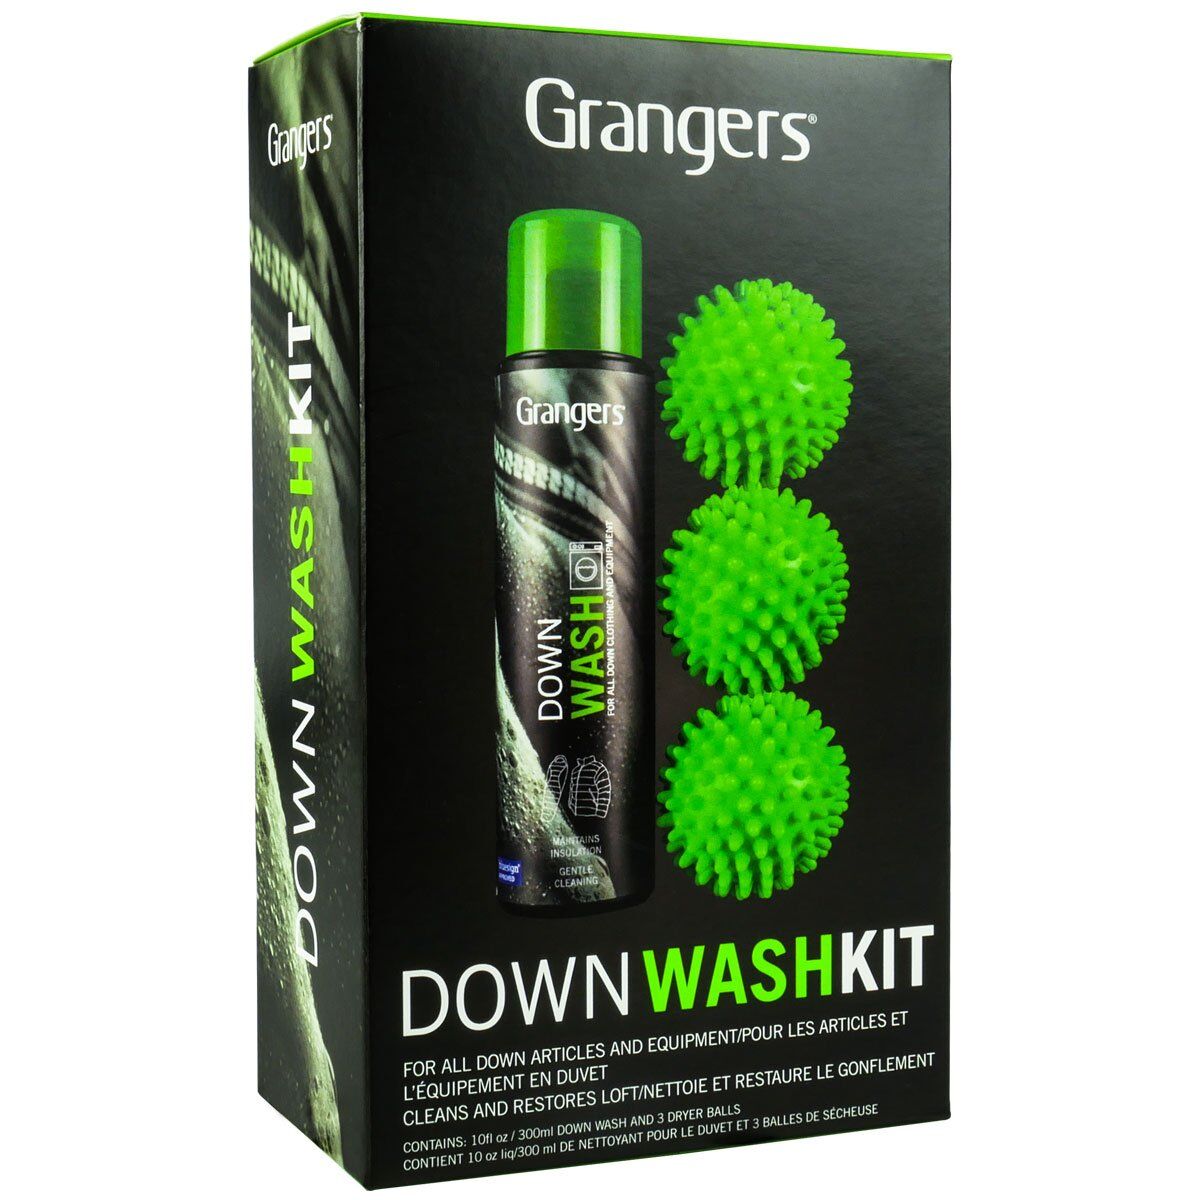 Grangers Down Wash Kit (concentrate) - Detergent